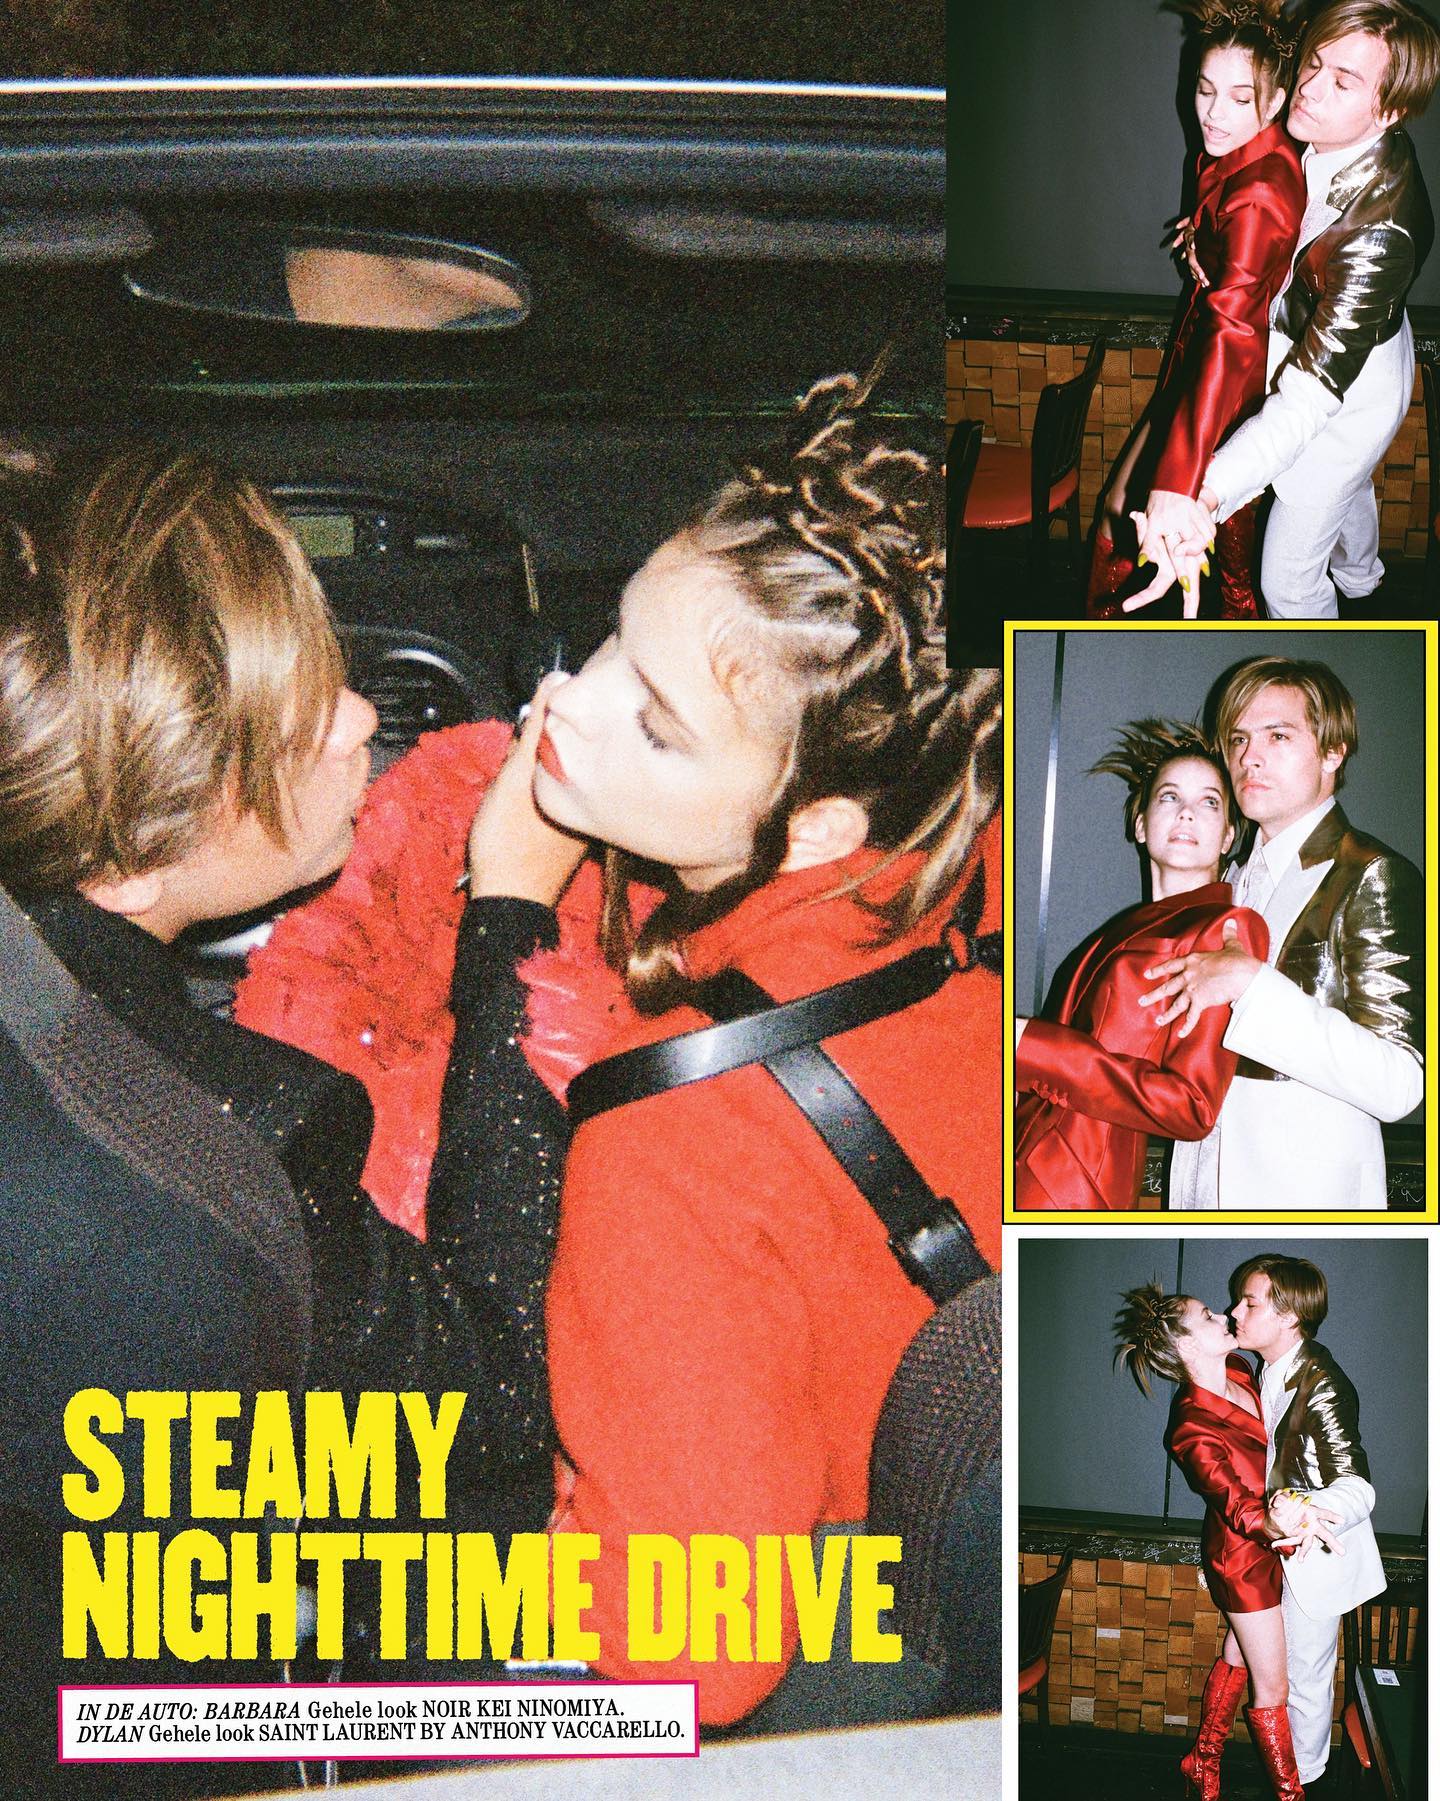 Fotos n°5 : Barbara Palvin y Dylan Sprouse Hit the Cover!